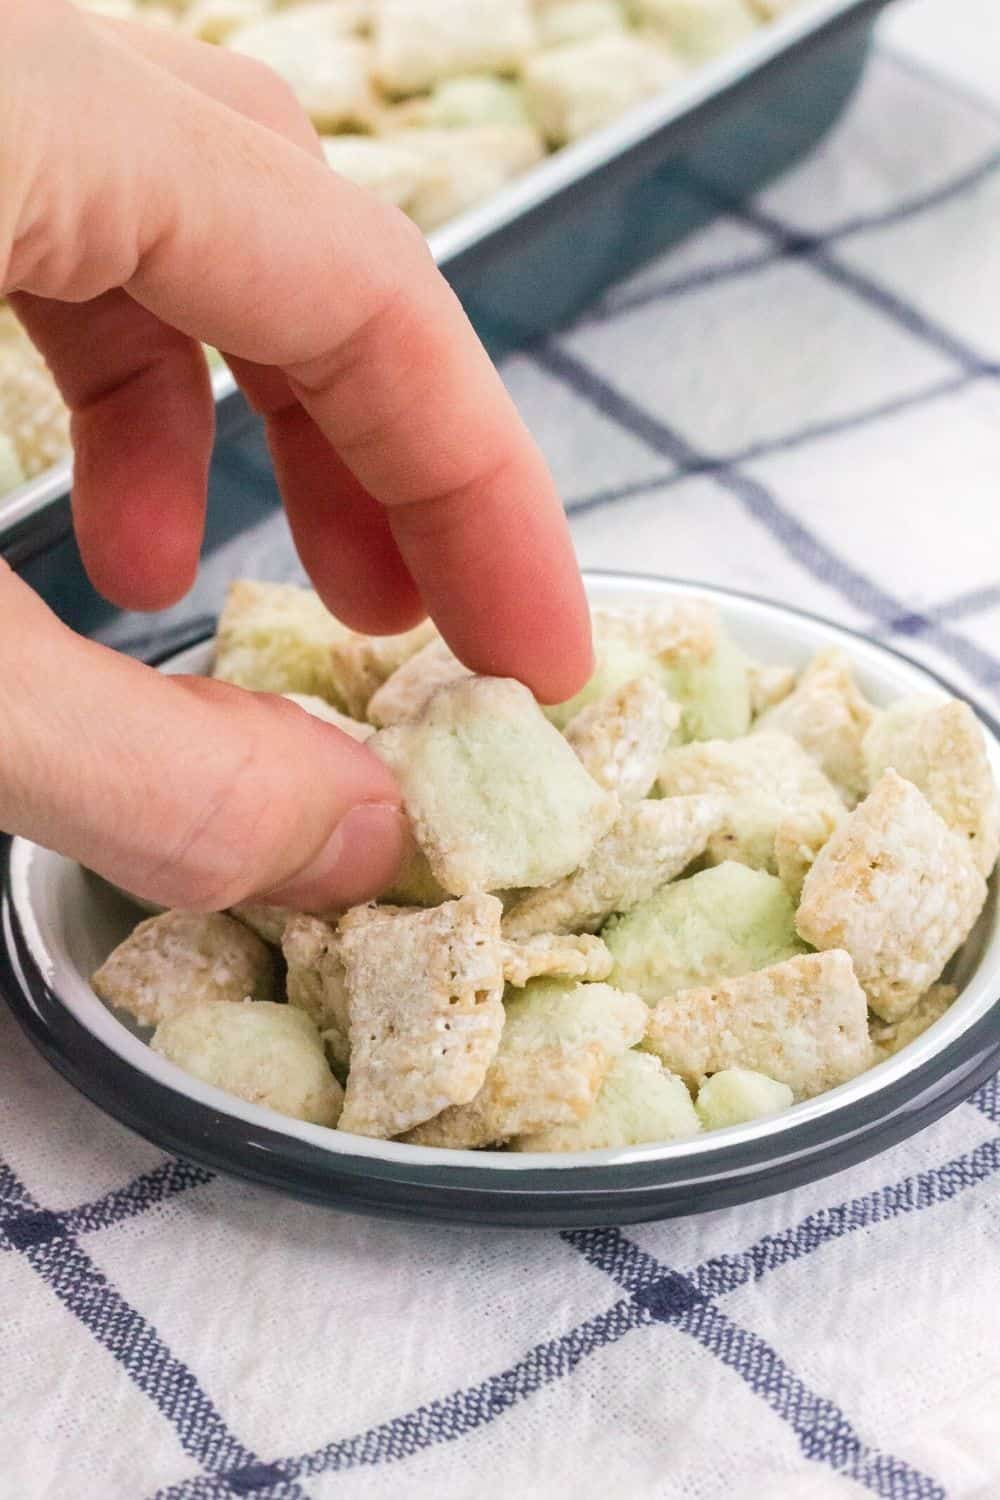 a woman's hand reaches into a small round dish of pistachio muddy buddies snack mix